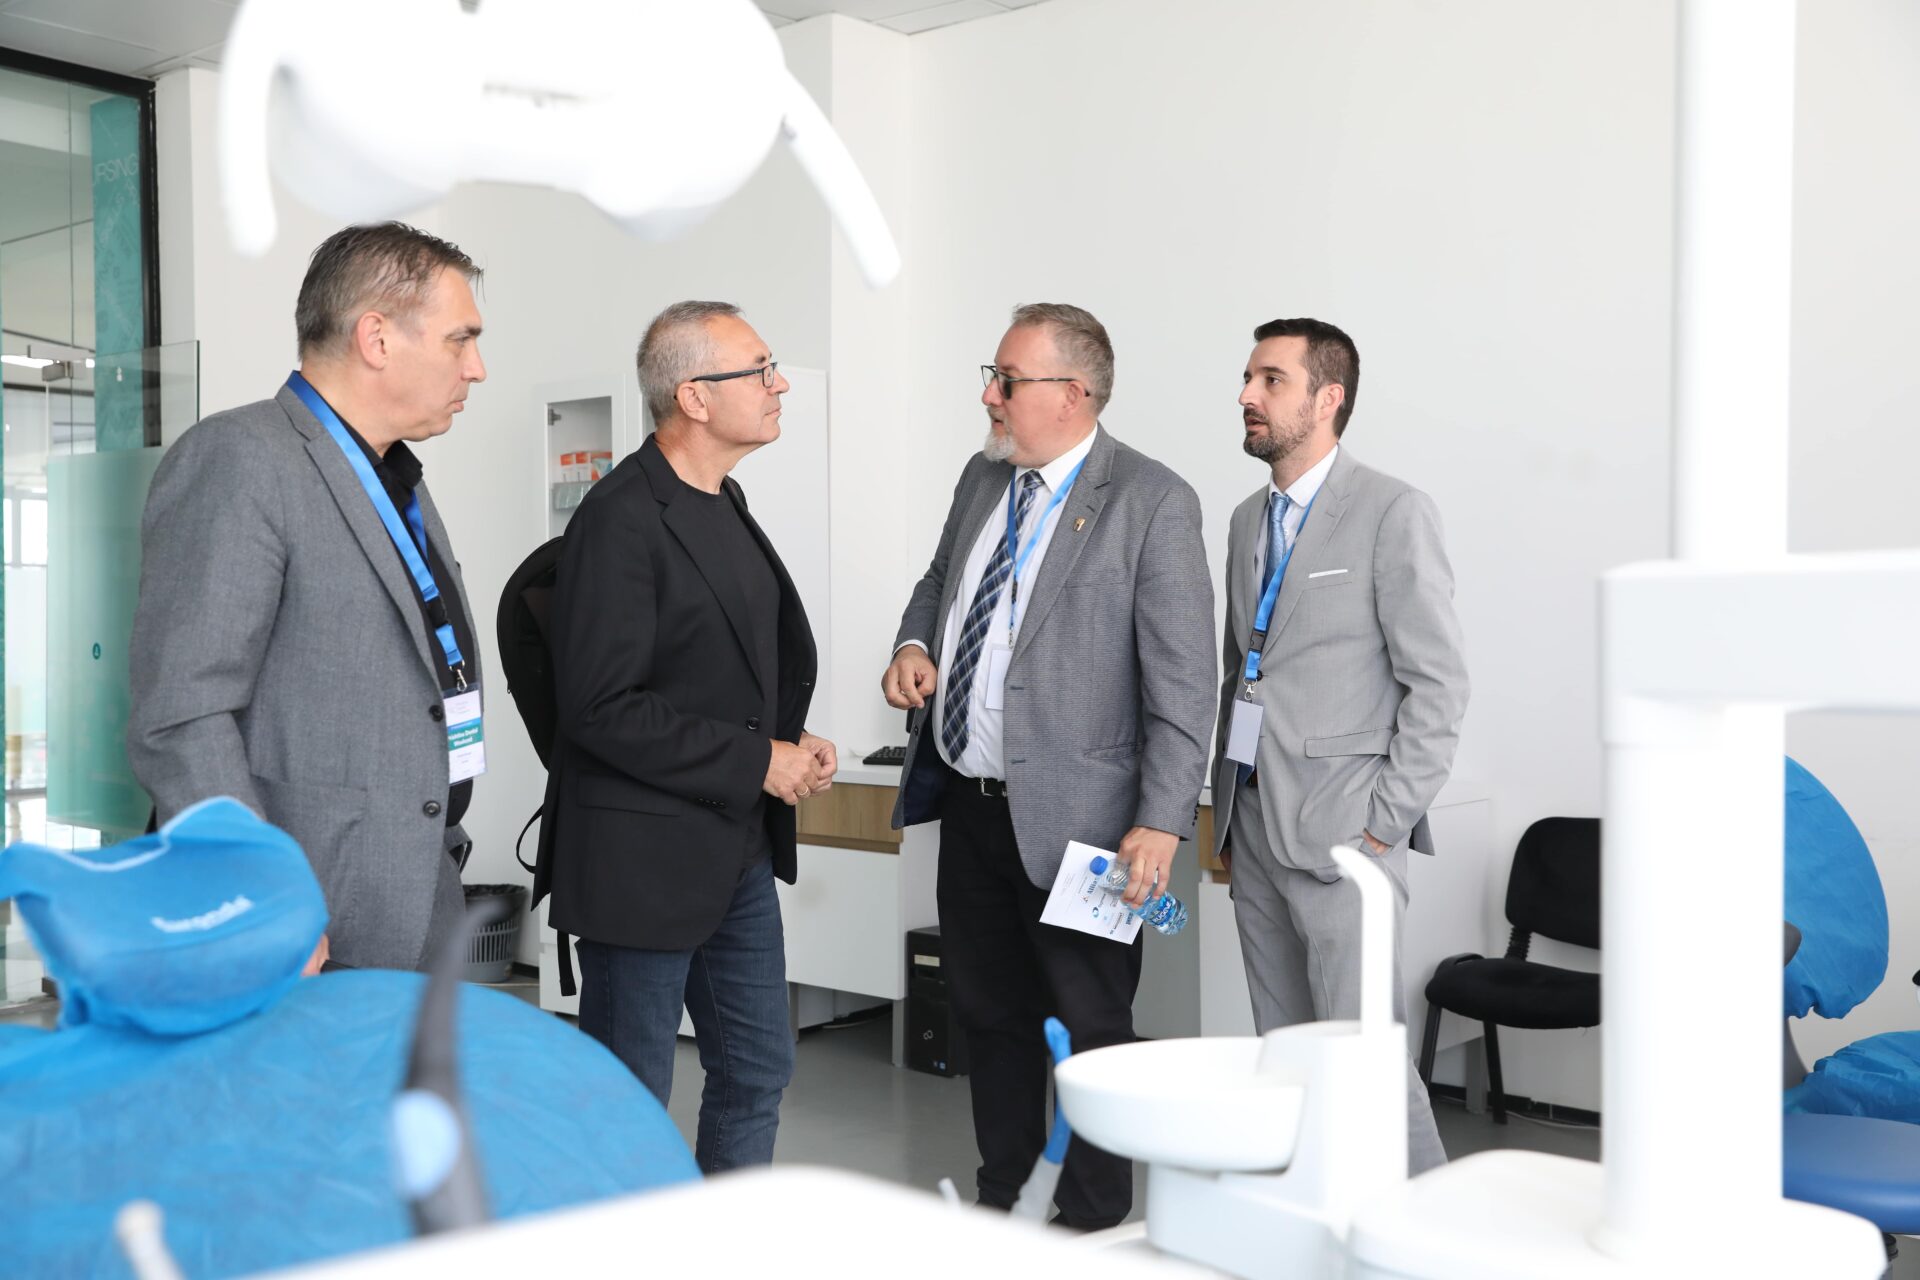 Representatives from the Jaume University of Spain visit the Faculty of Dentistry of the AAB College